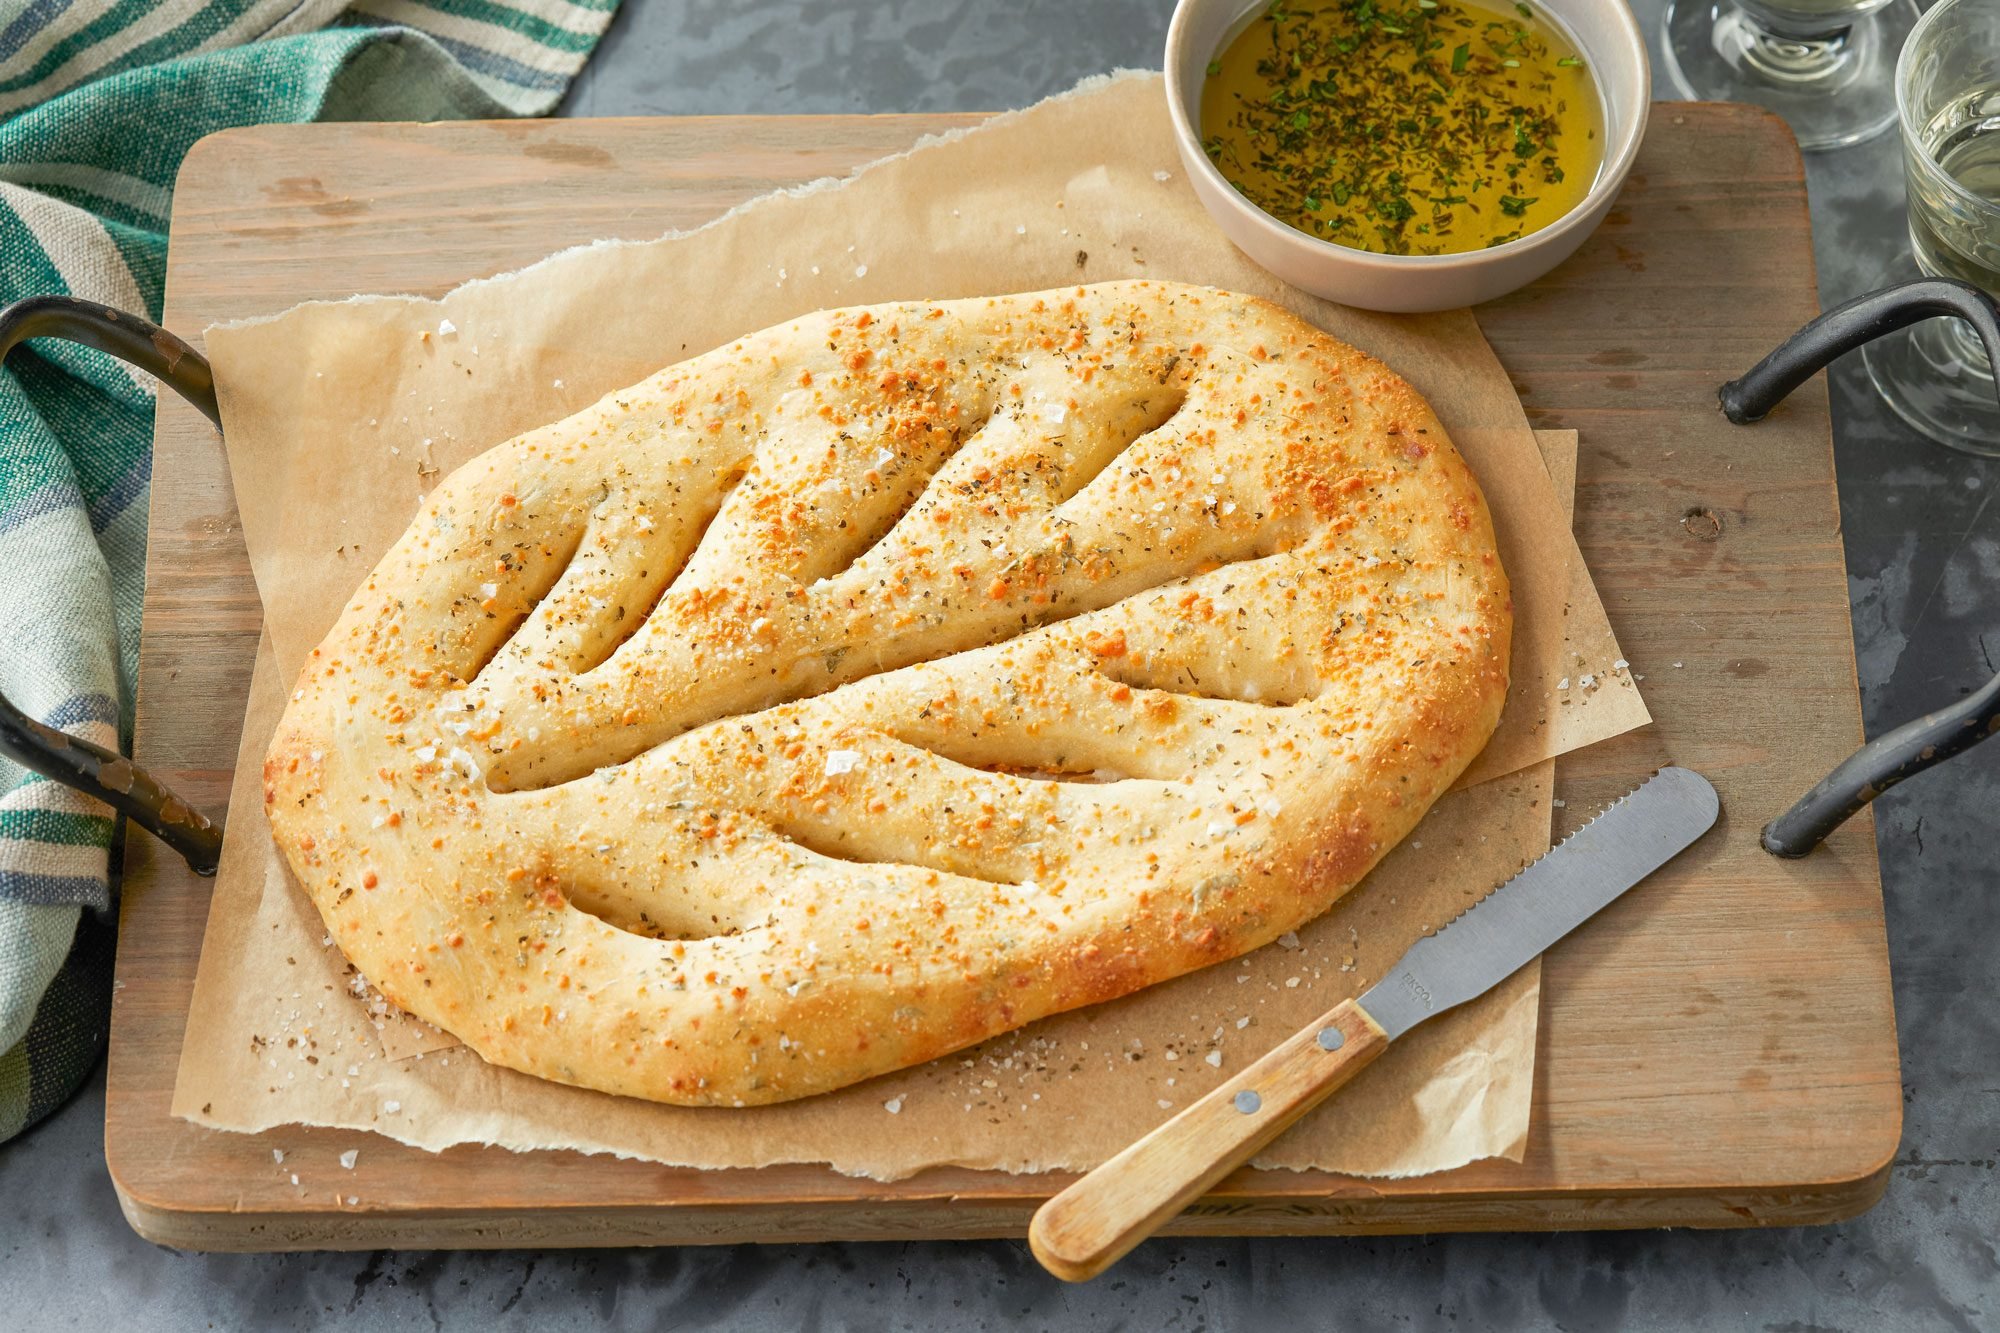 Fougasse on a Baking Paper on Wooden Serving Plate with Knife